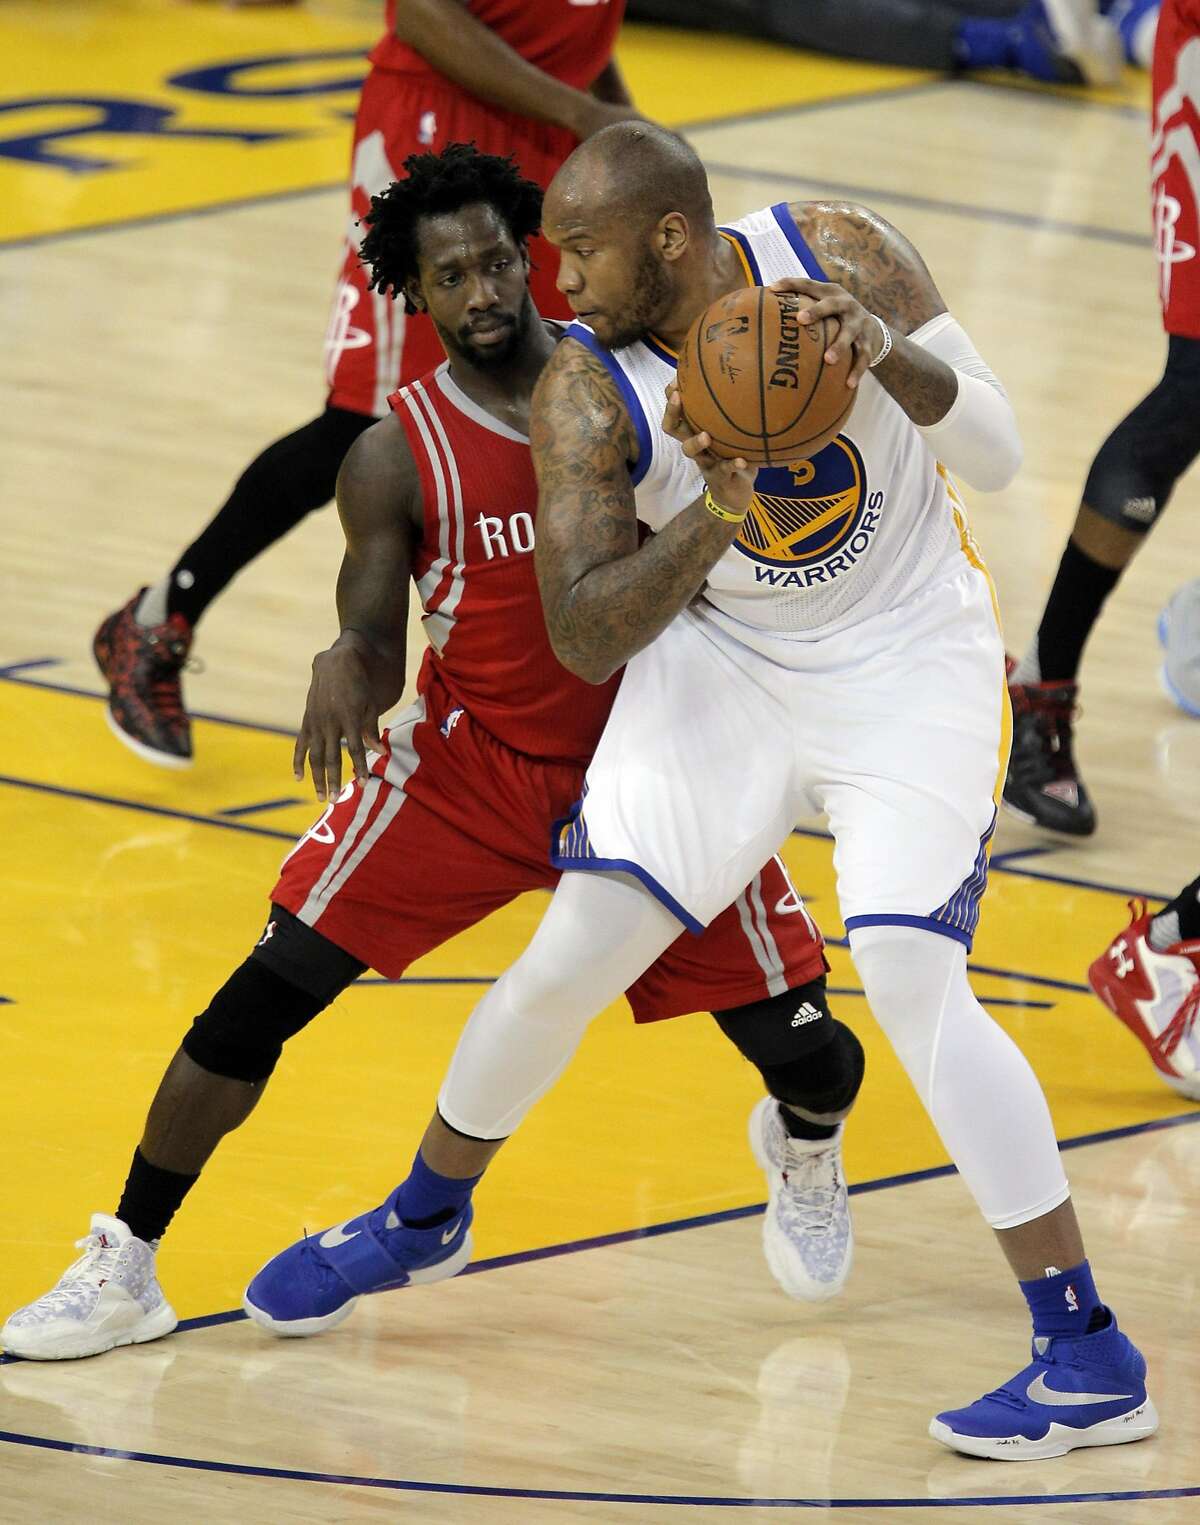 Patrick Beverley (2) defends against Marreese Speights (5) in the first half as the Golden State Warriors played the Houston Rockets in game 2 of the first round of the Western Conference Playoffs at Oracle Arena in Oakland, Calif., on Monday, April 18, 2016.